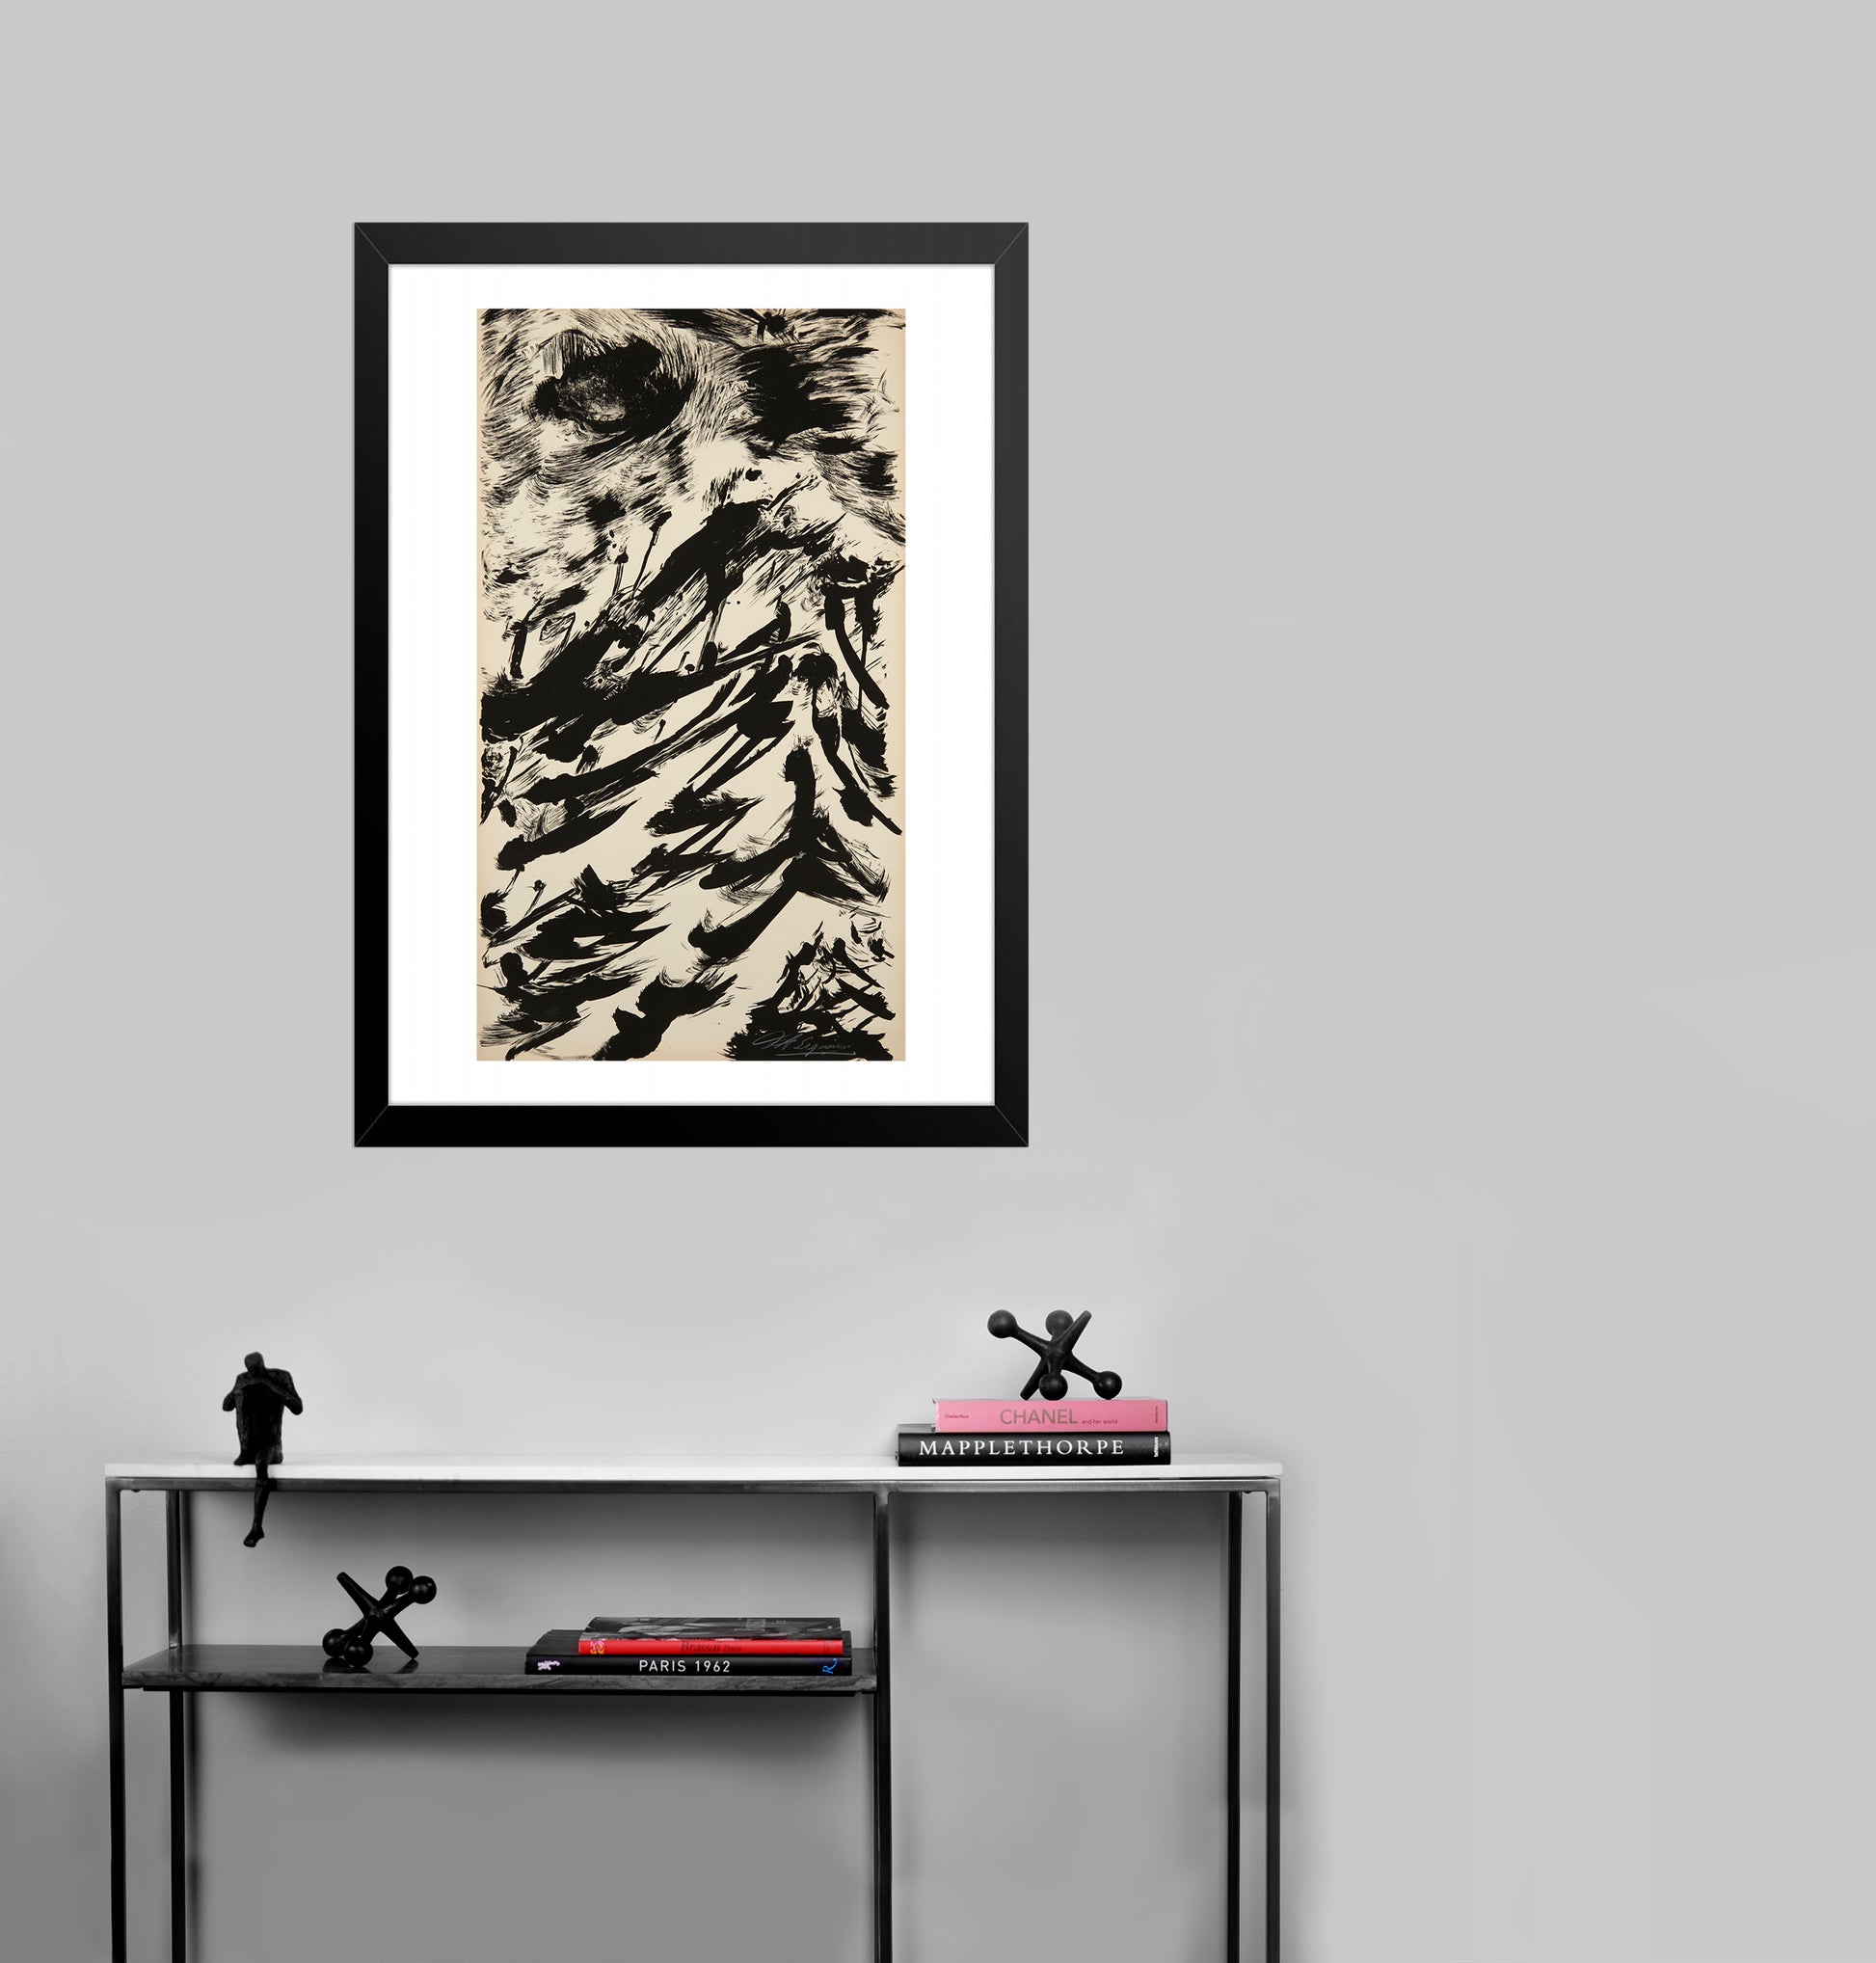 Plate 4 from the Portfolio “Pablo Neruda, Poems from Canto General" illustrations by David Alfaro Siqueiros - Mourlot Editions - Fine_Art - Poster - Lithograph - Wall Art - Vintage - Prints - Original